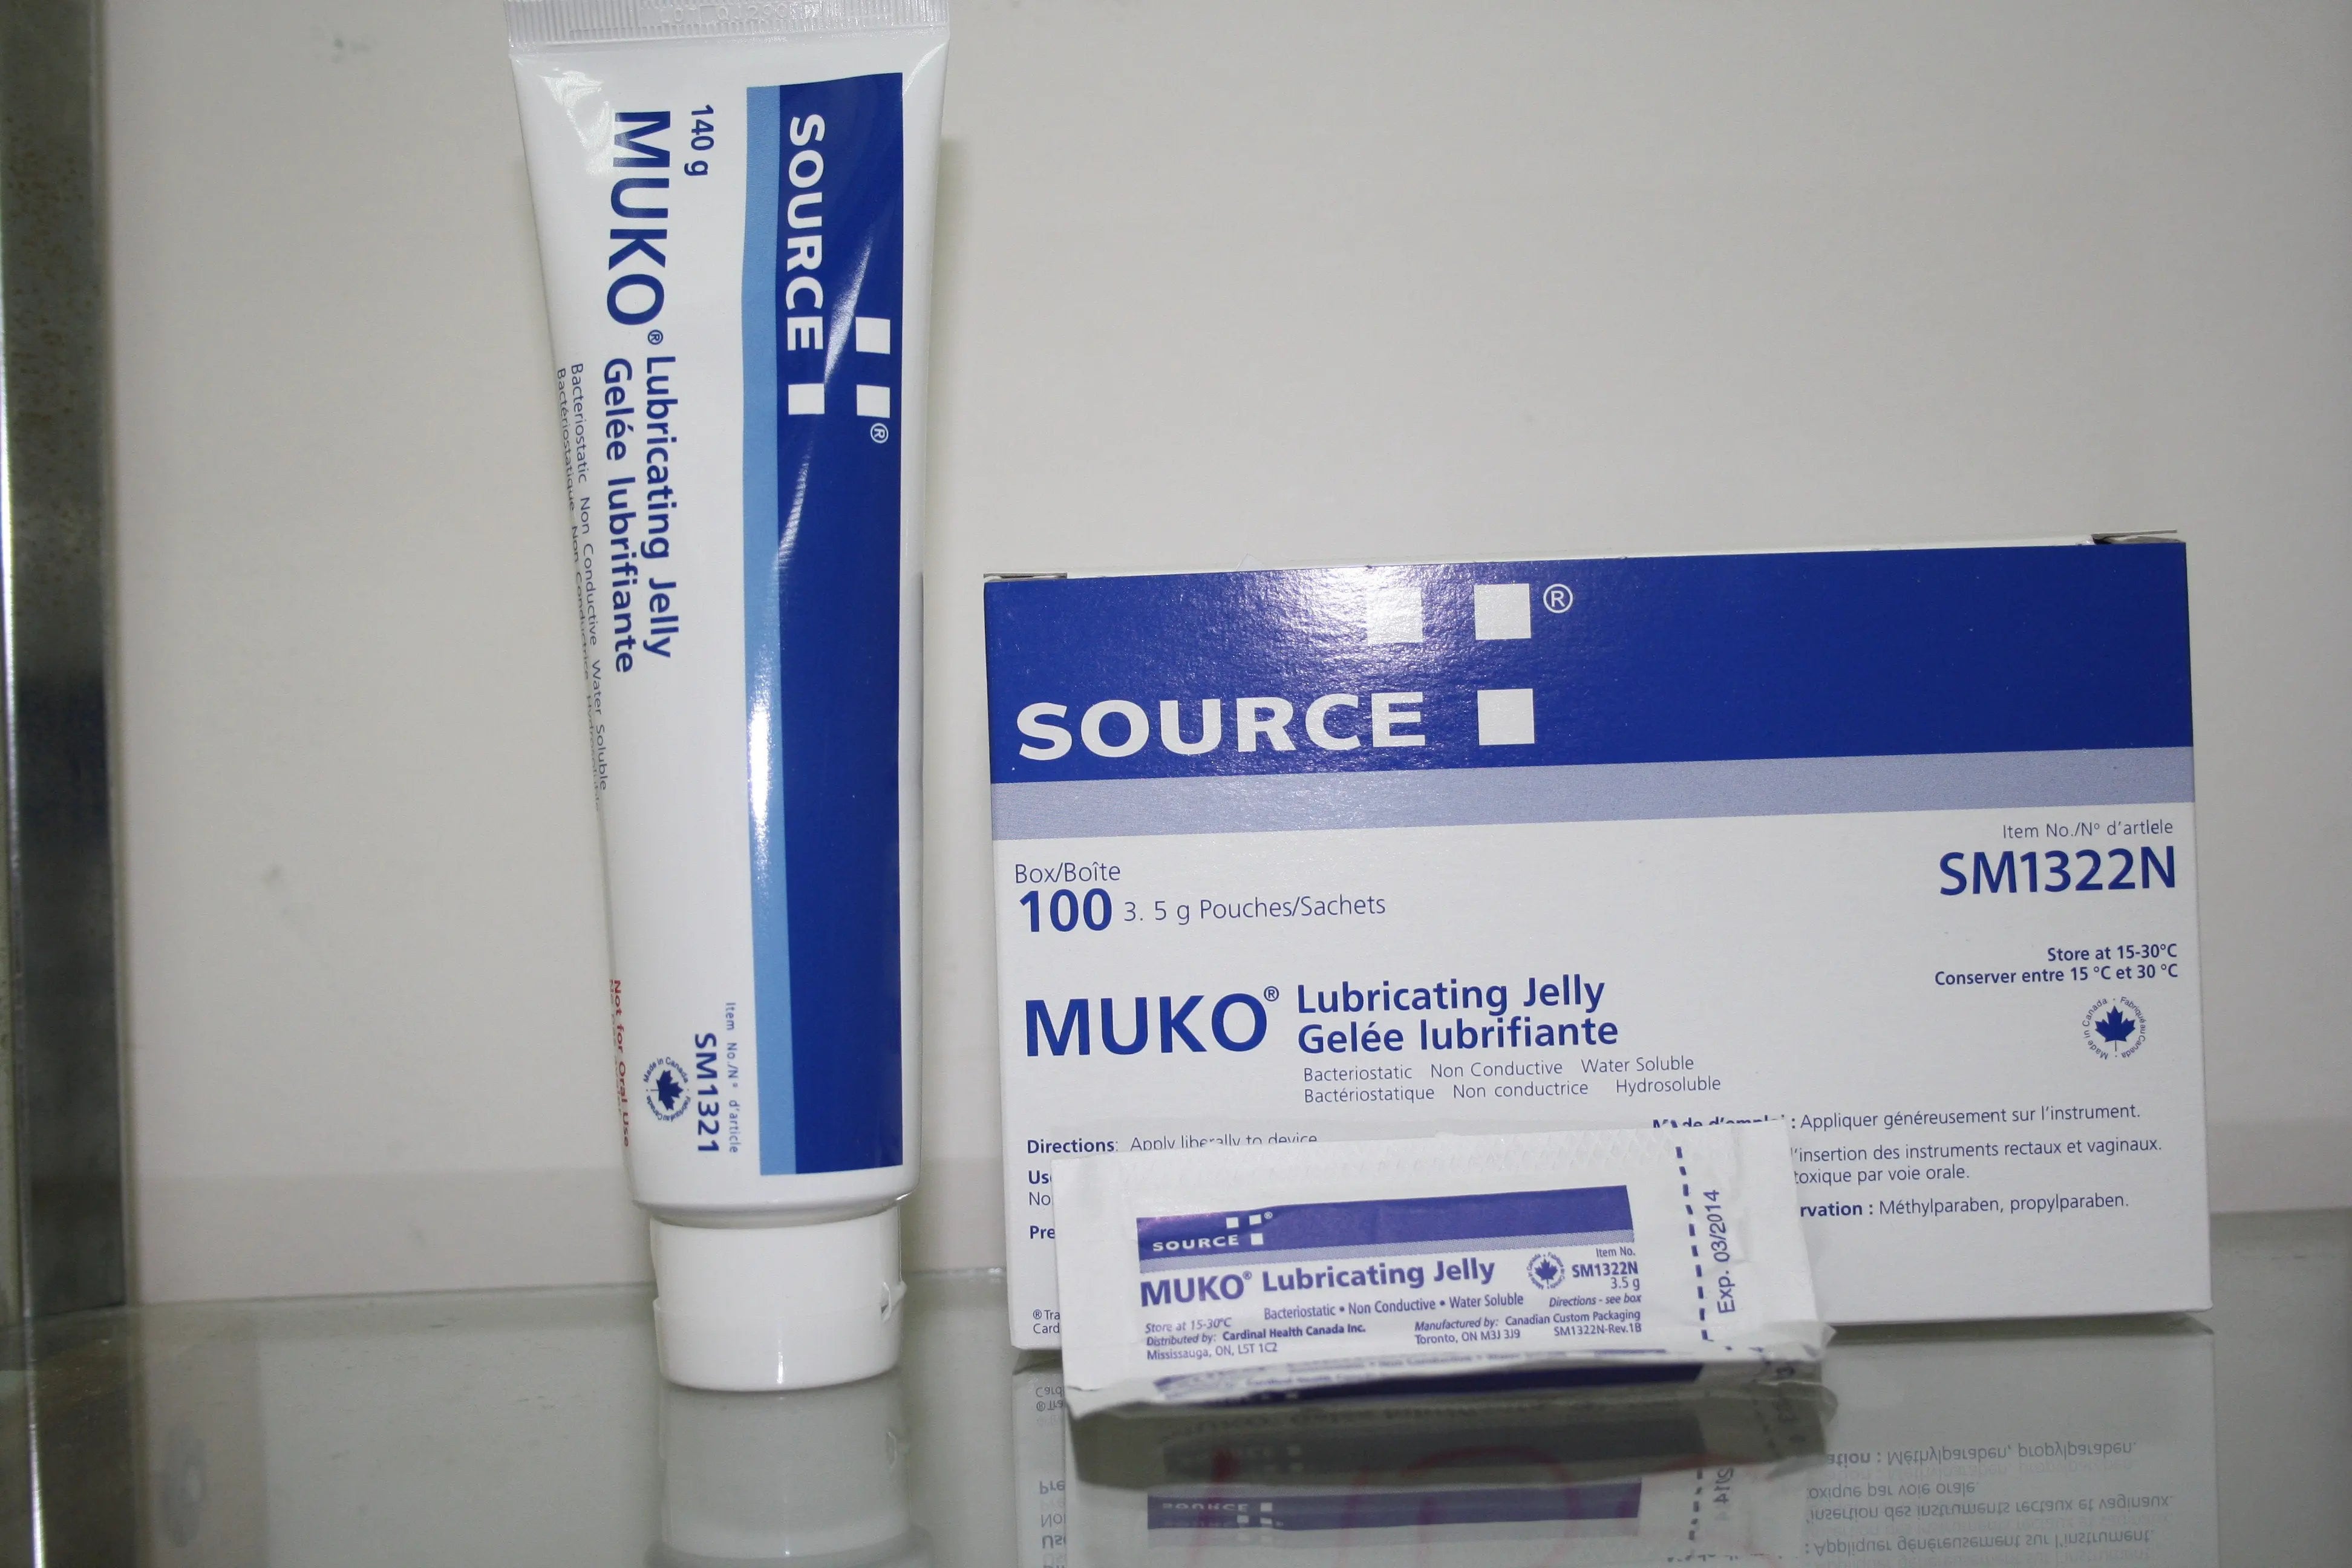 SM 1322N (CS20) BX/100 MUKO LUBRICATING JELLY, SIZE 3.5G PACKETS